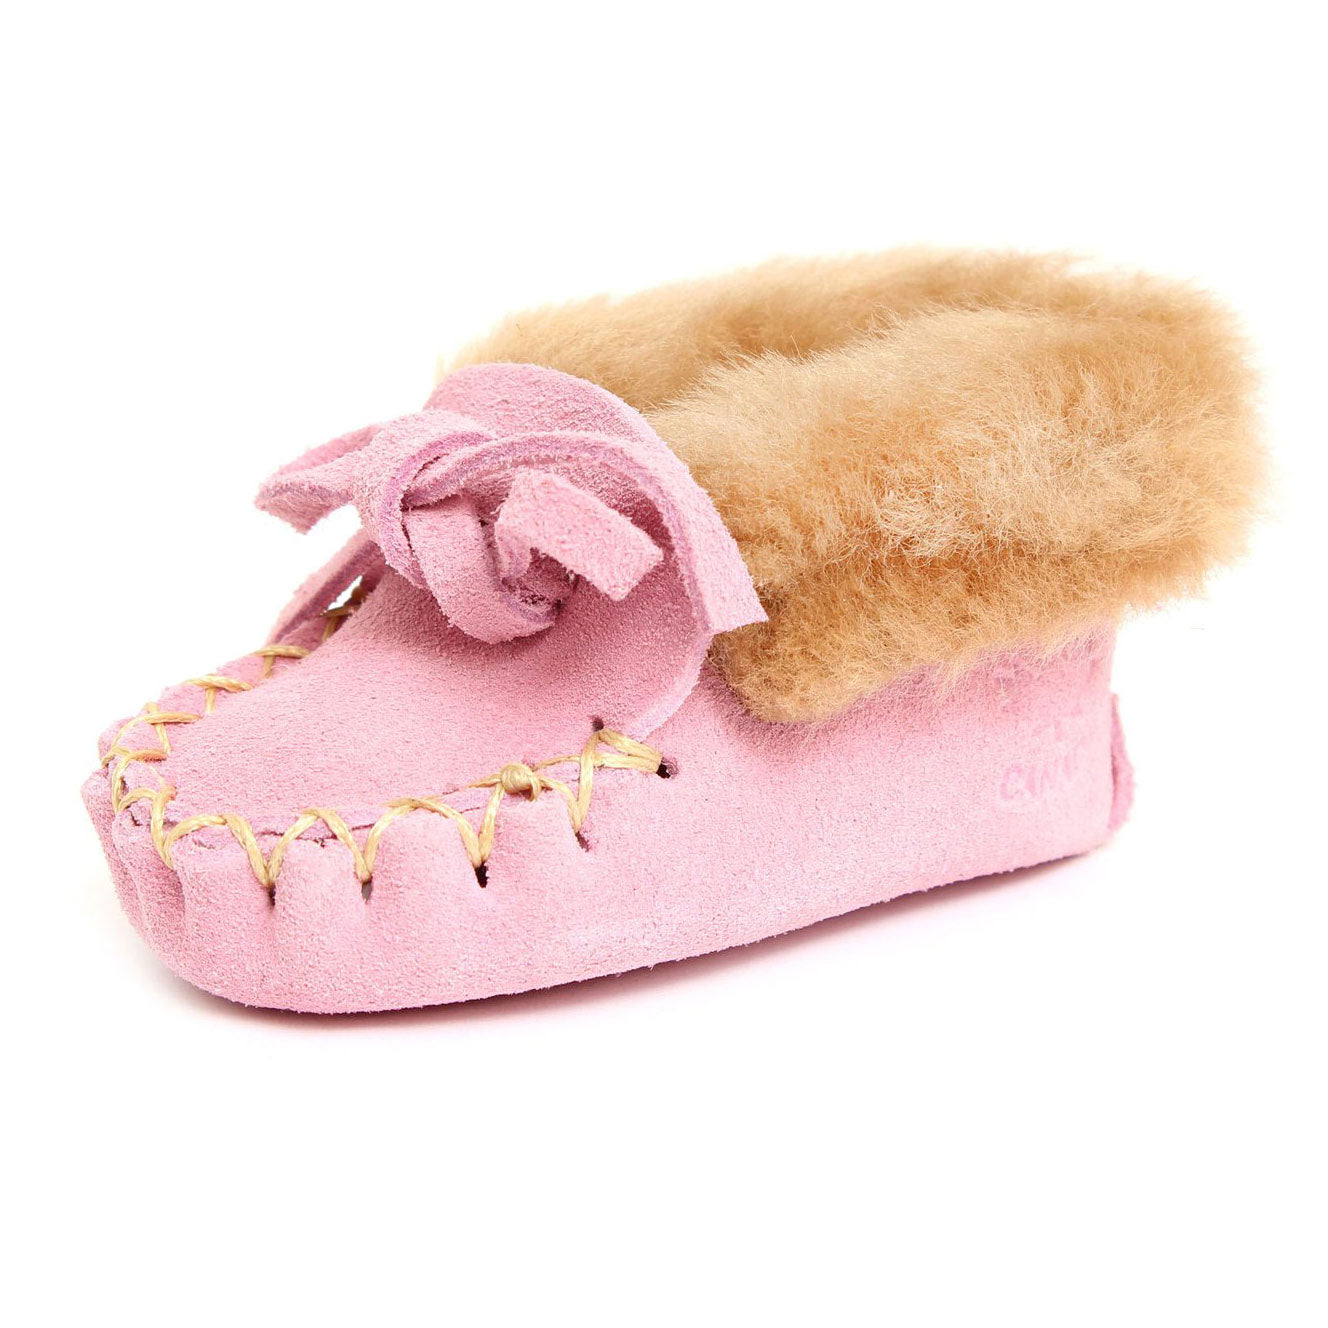 Traditional Baby Mocs in pink leather available at Bonjour Baby Baskets